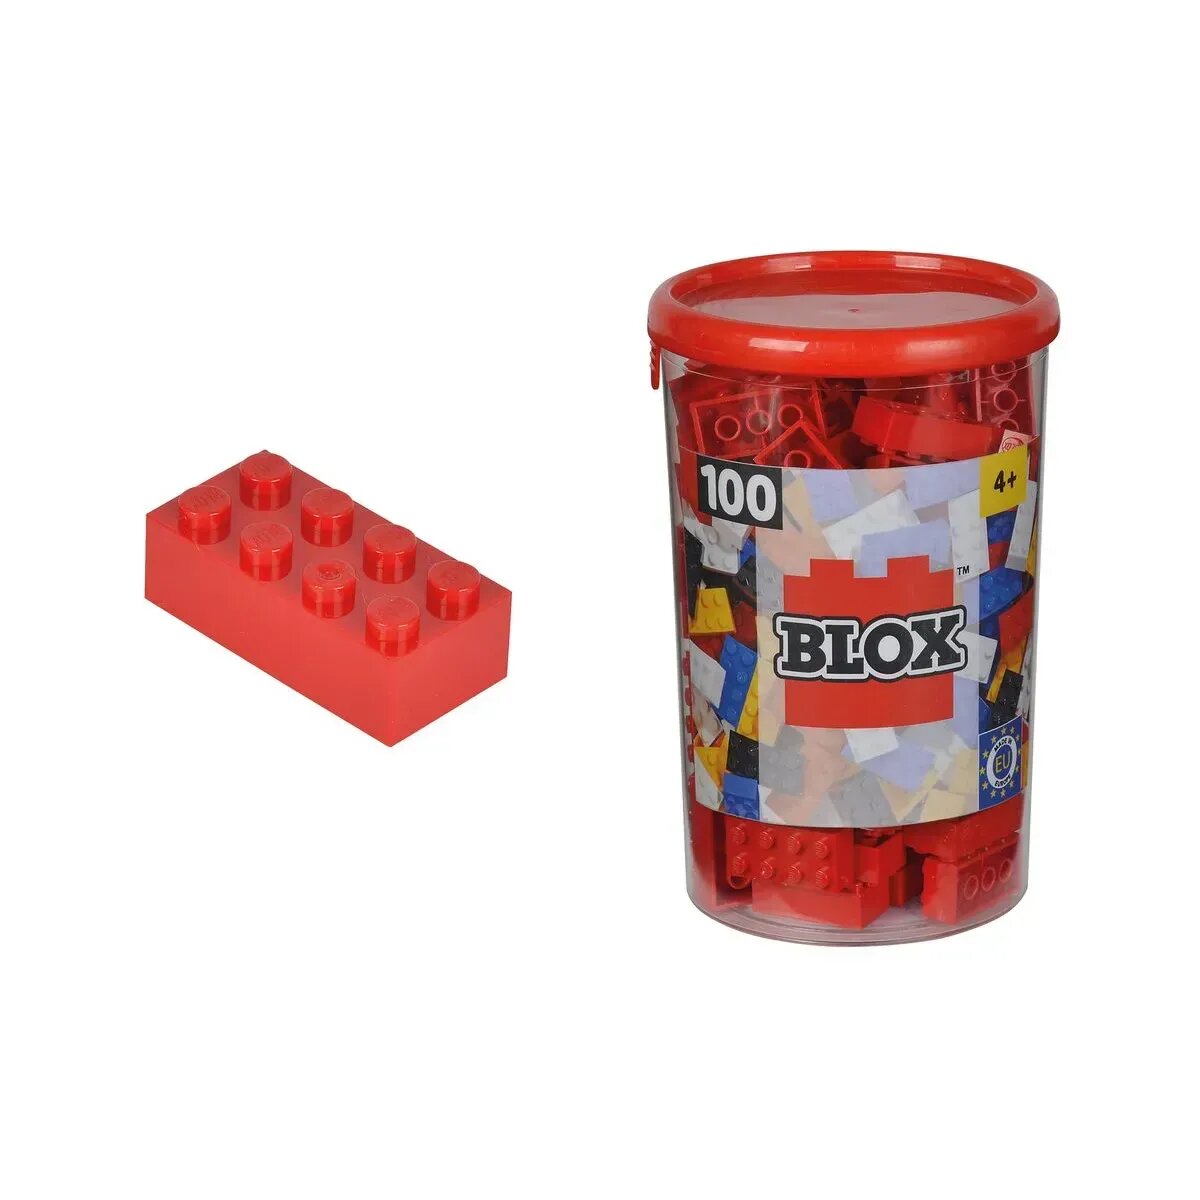 Simba Blox 100 rote 8er Steine in Dose